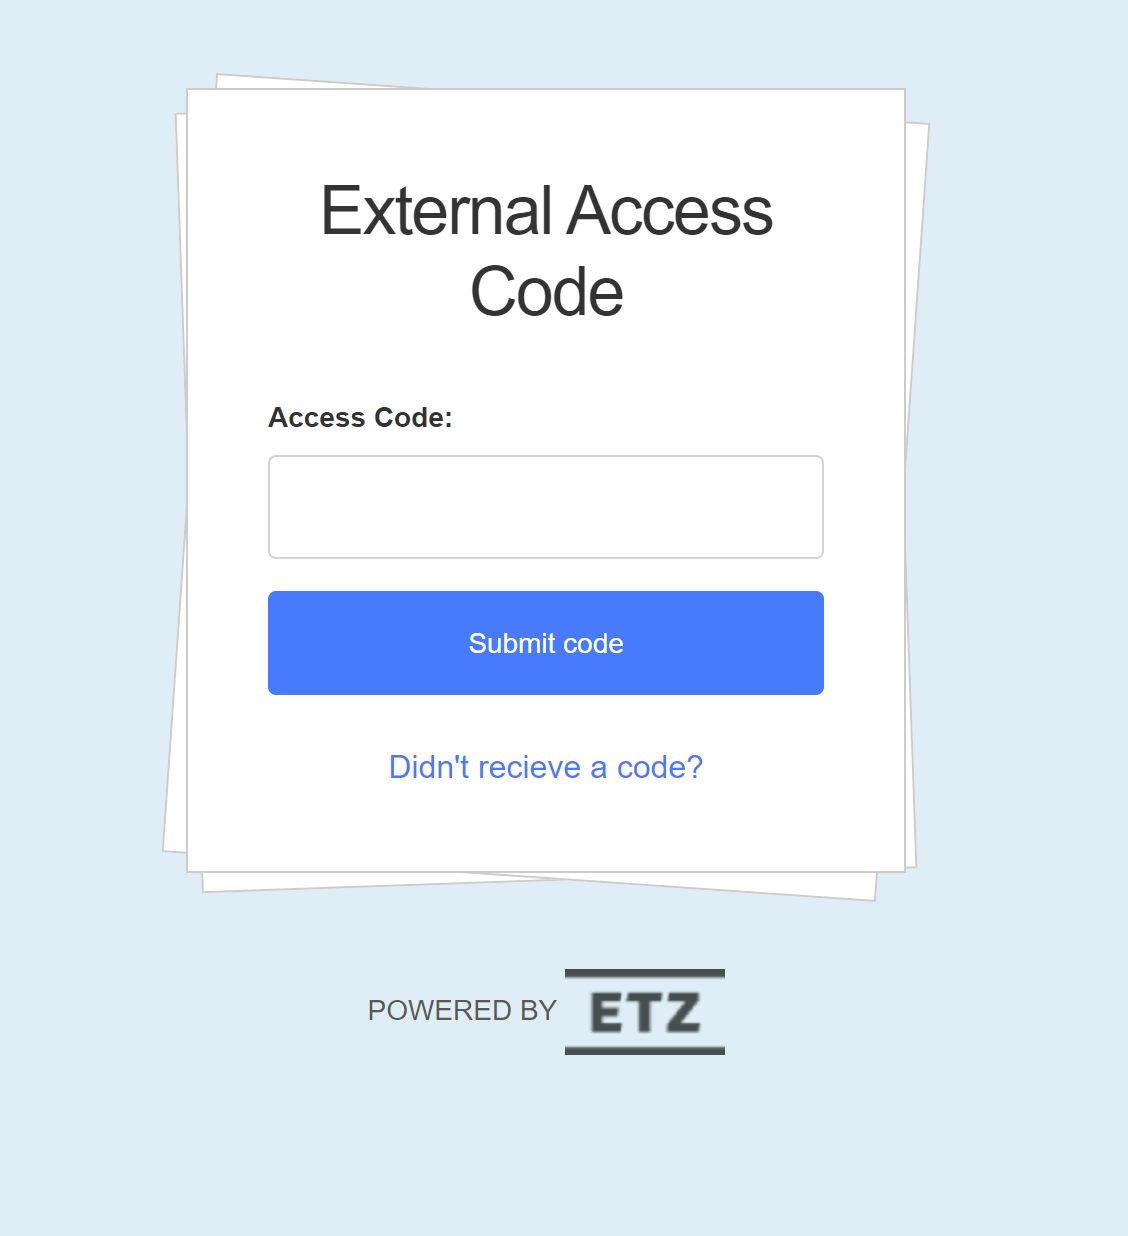 Alternate_Link_Code_Entry_Page.PNG